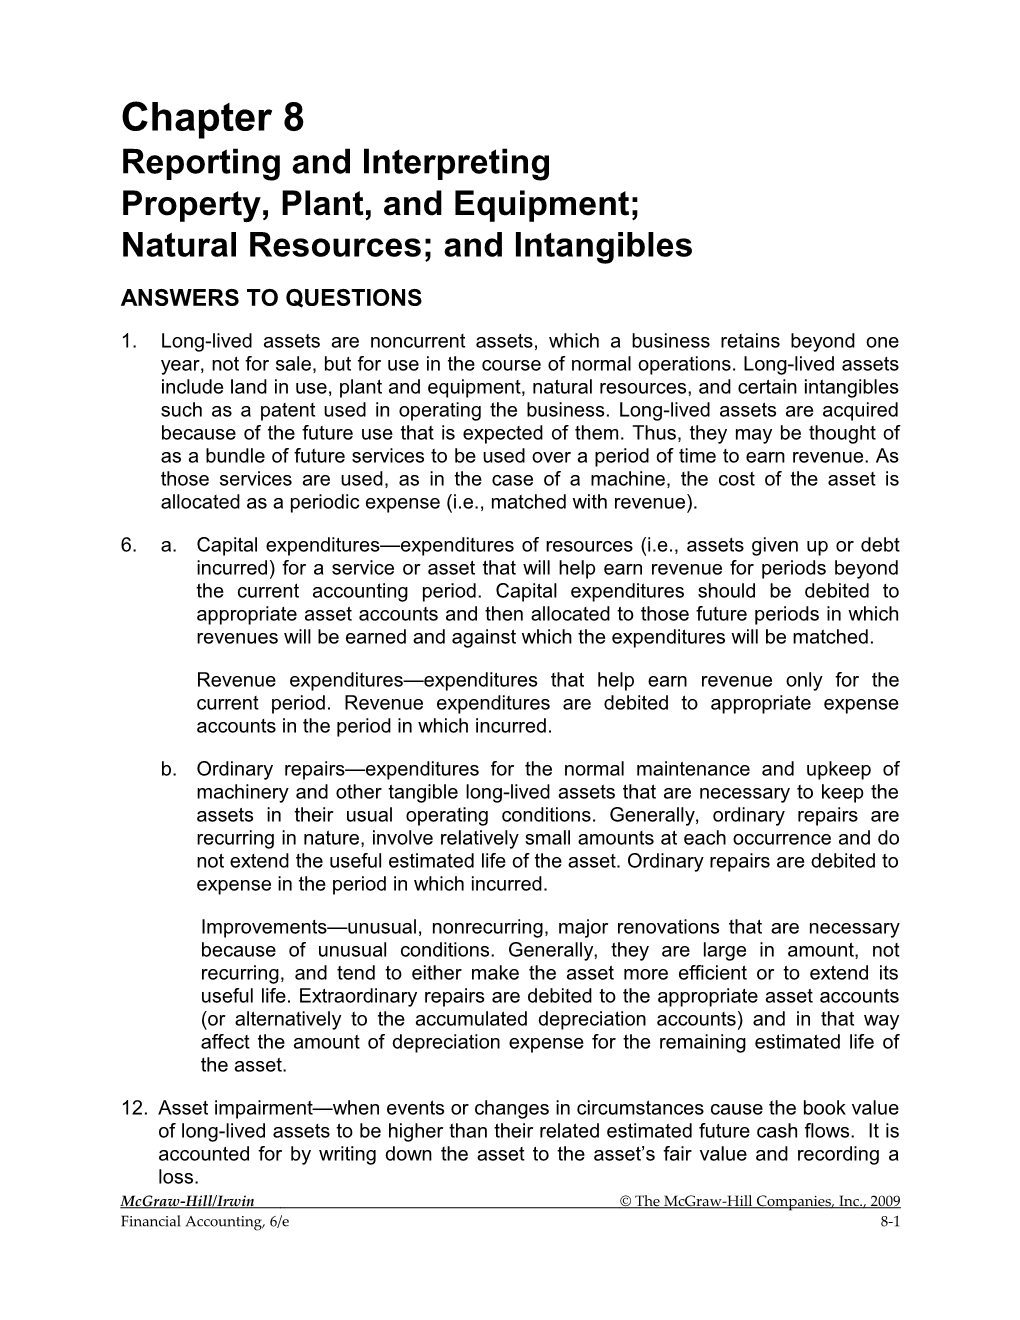 Reporting and Interpreting Property,Plant,Andequipment; Natural Resources; and Intangibles